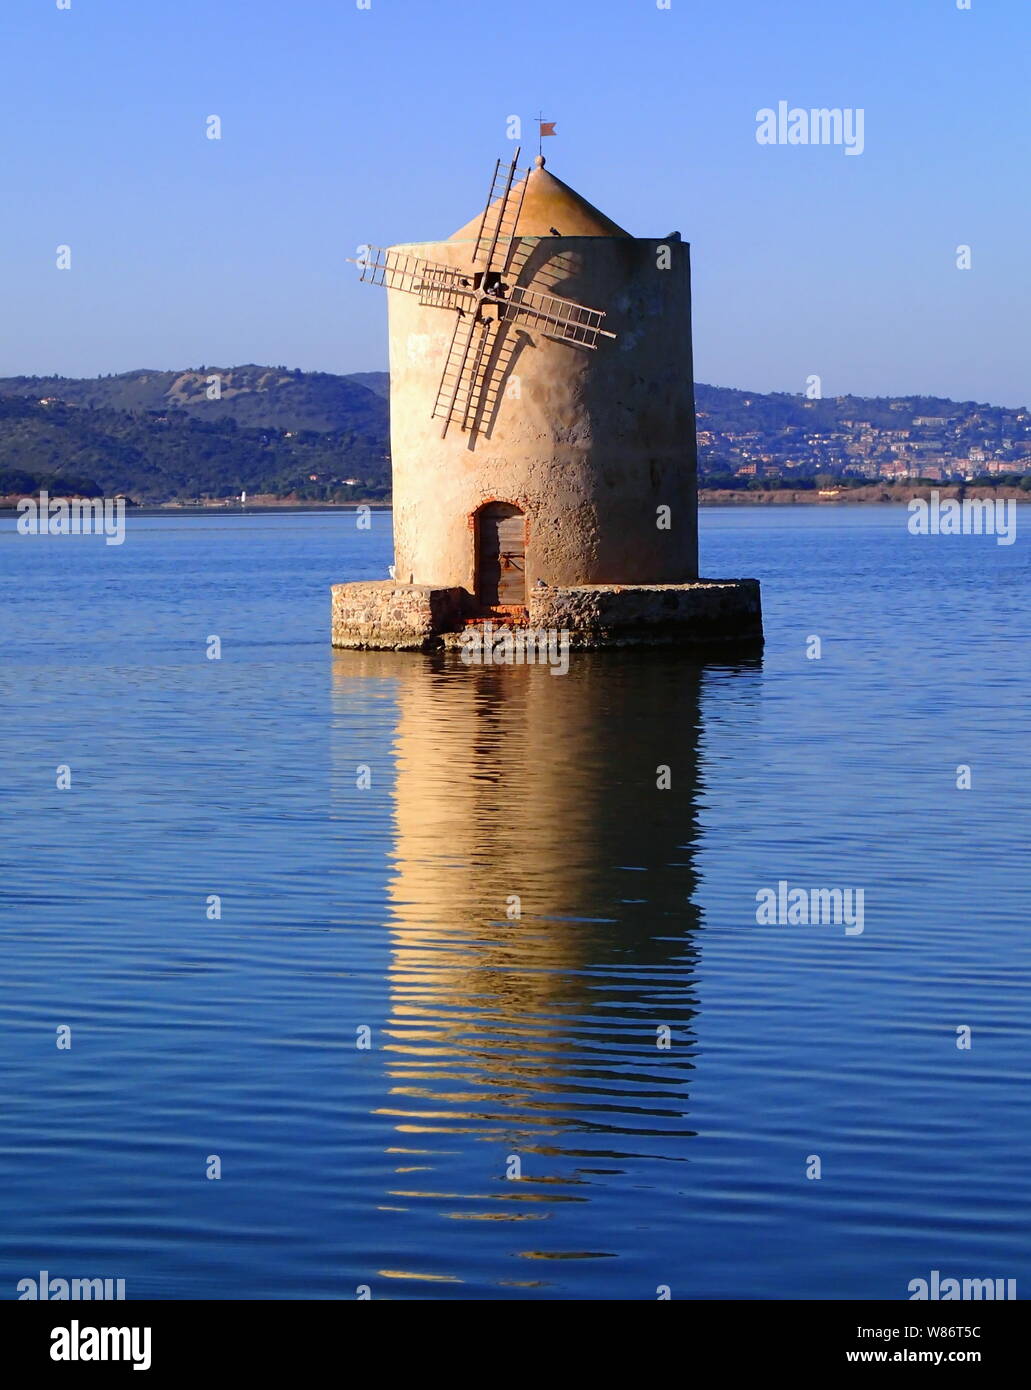 Old slanted windmill in water, Orbetello, Italy Stock Photo